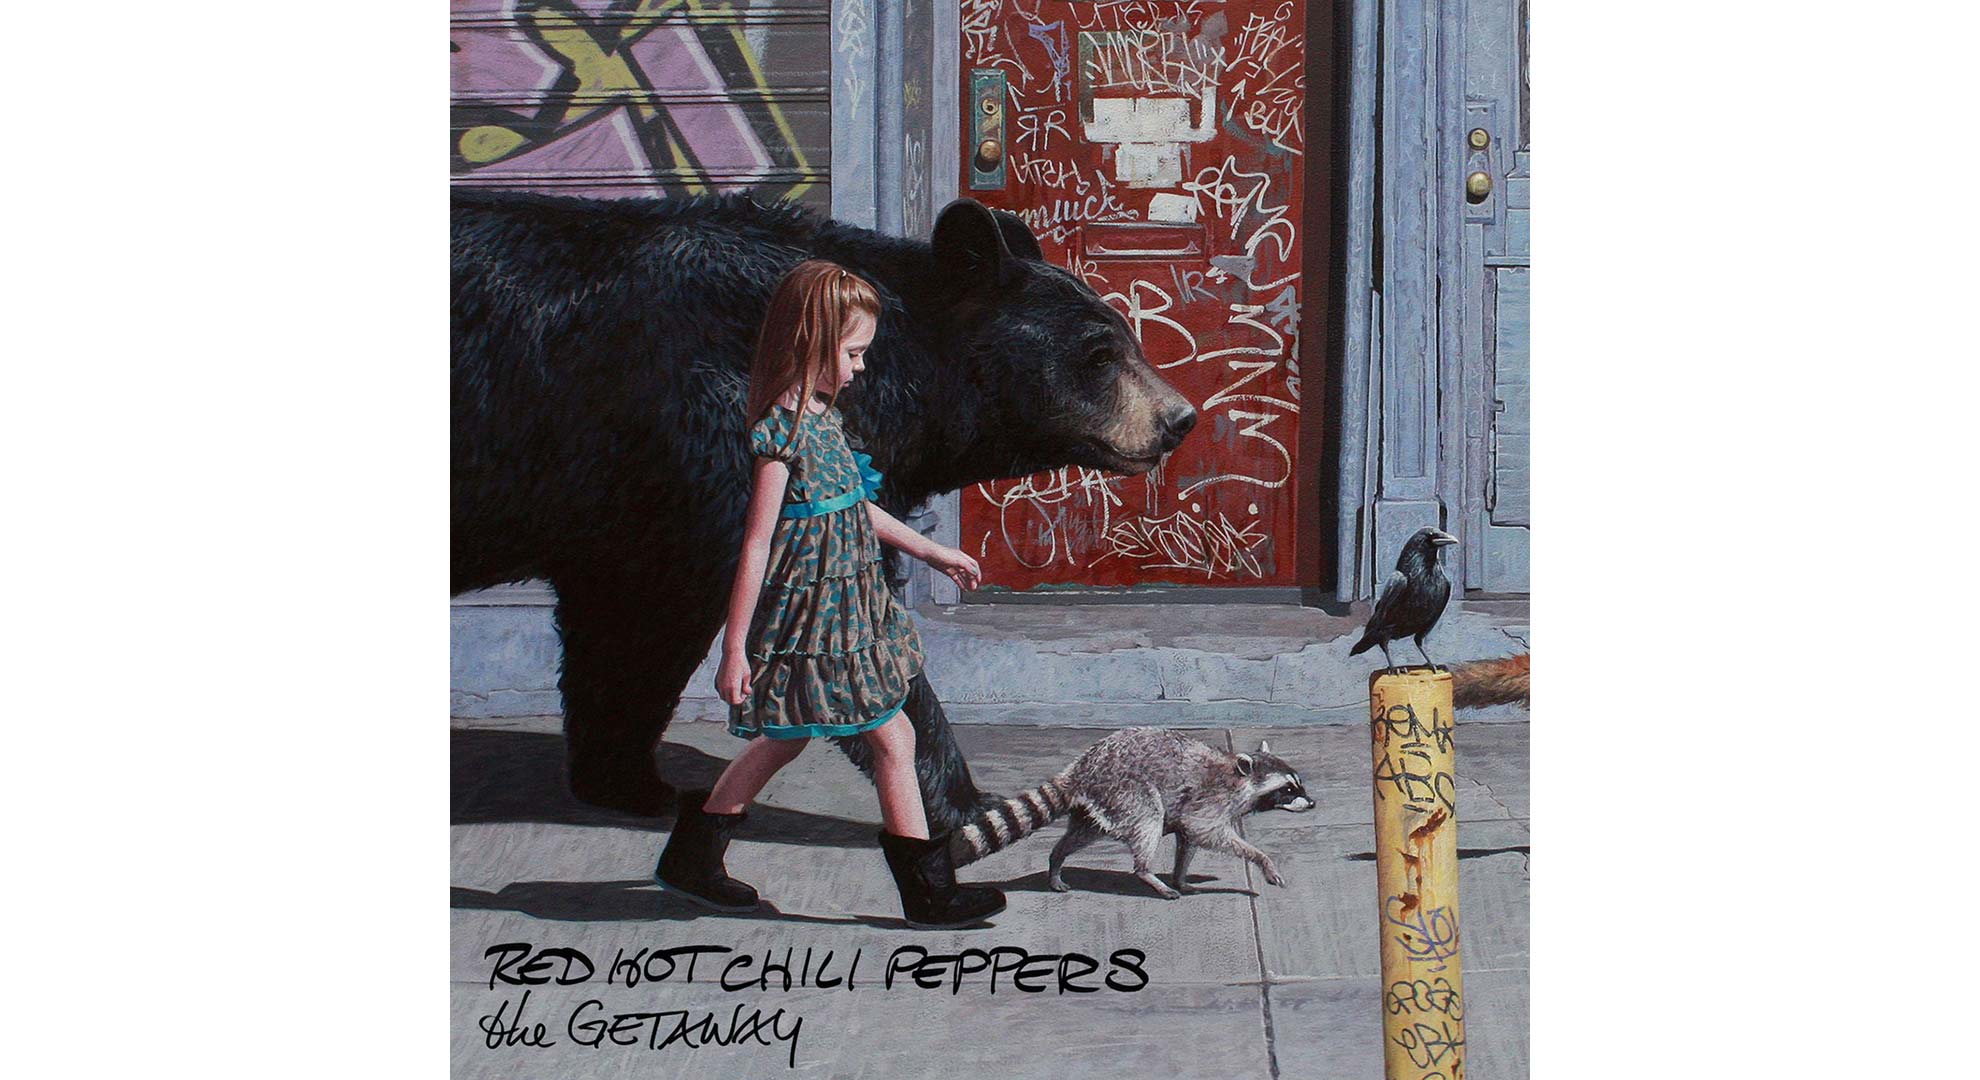 Red hot peppers dark. The Getaway Red hot Chili Peppers. RHCP the Getaway. Кевин Петерсон художник. The Getaway Red hot Chili Peppers обложка.